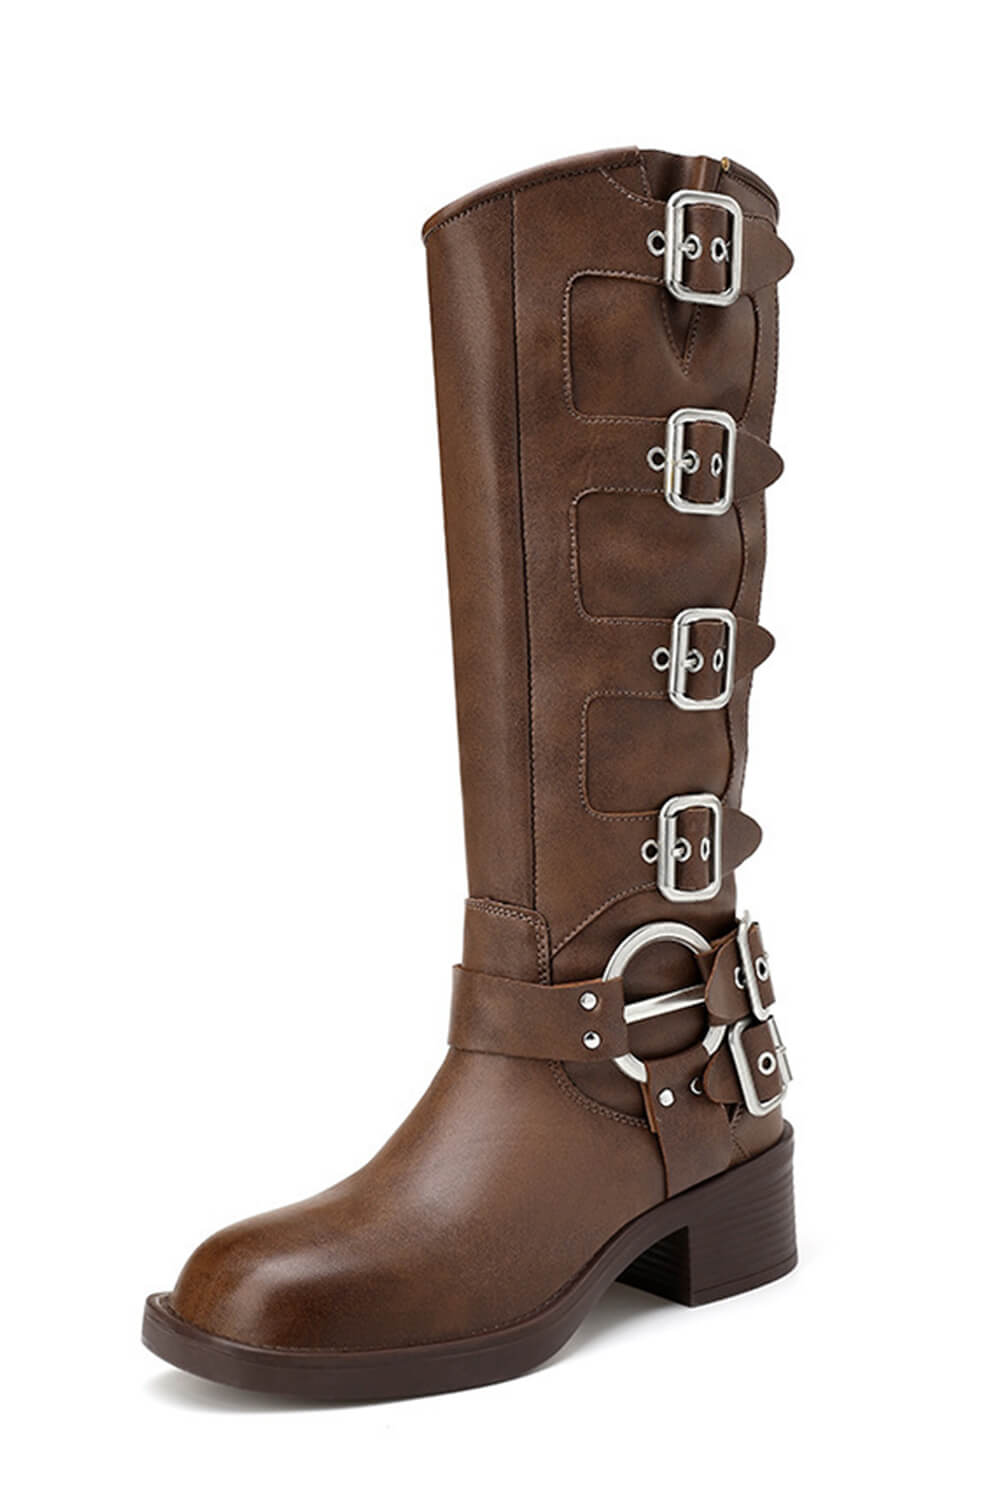 Buckle Strap Detail Mid-Calf Chunky Biker Boots - Brown